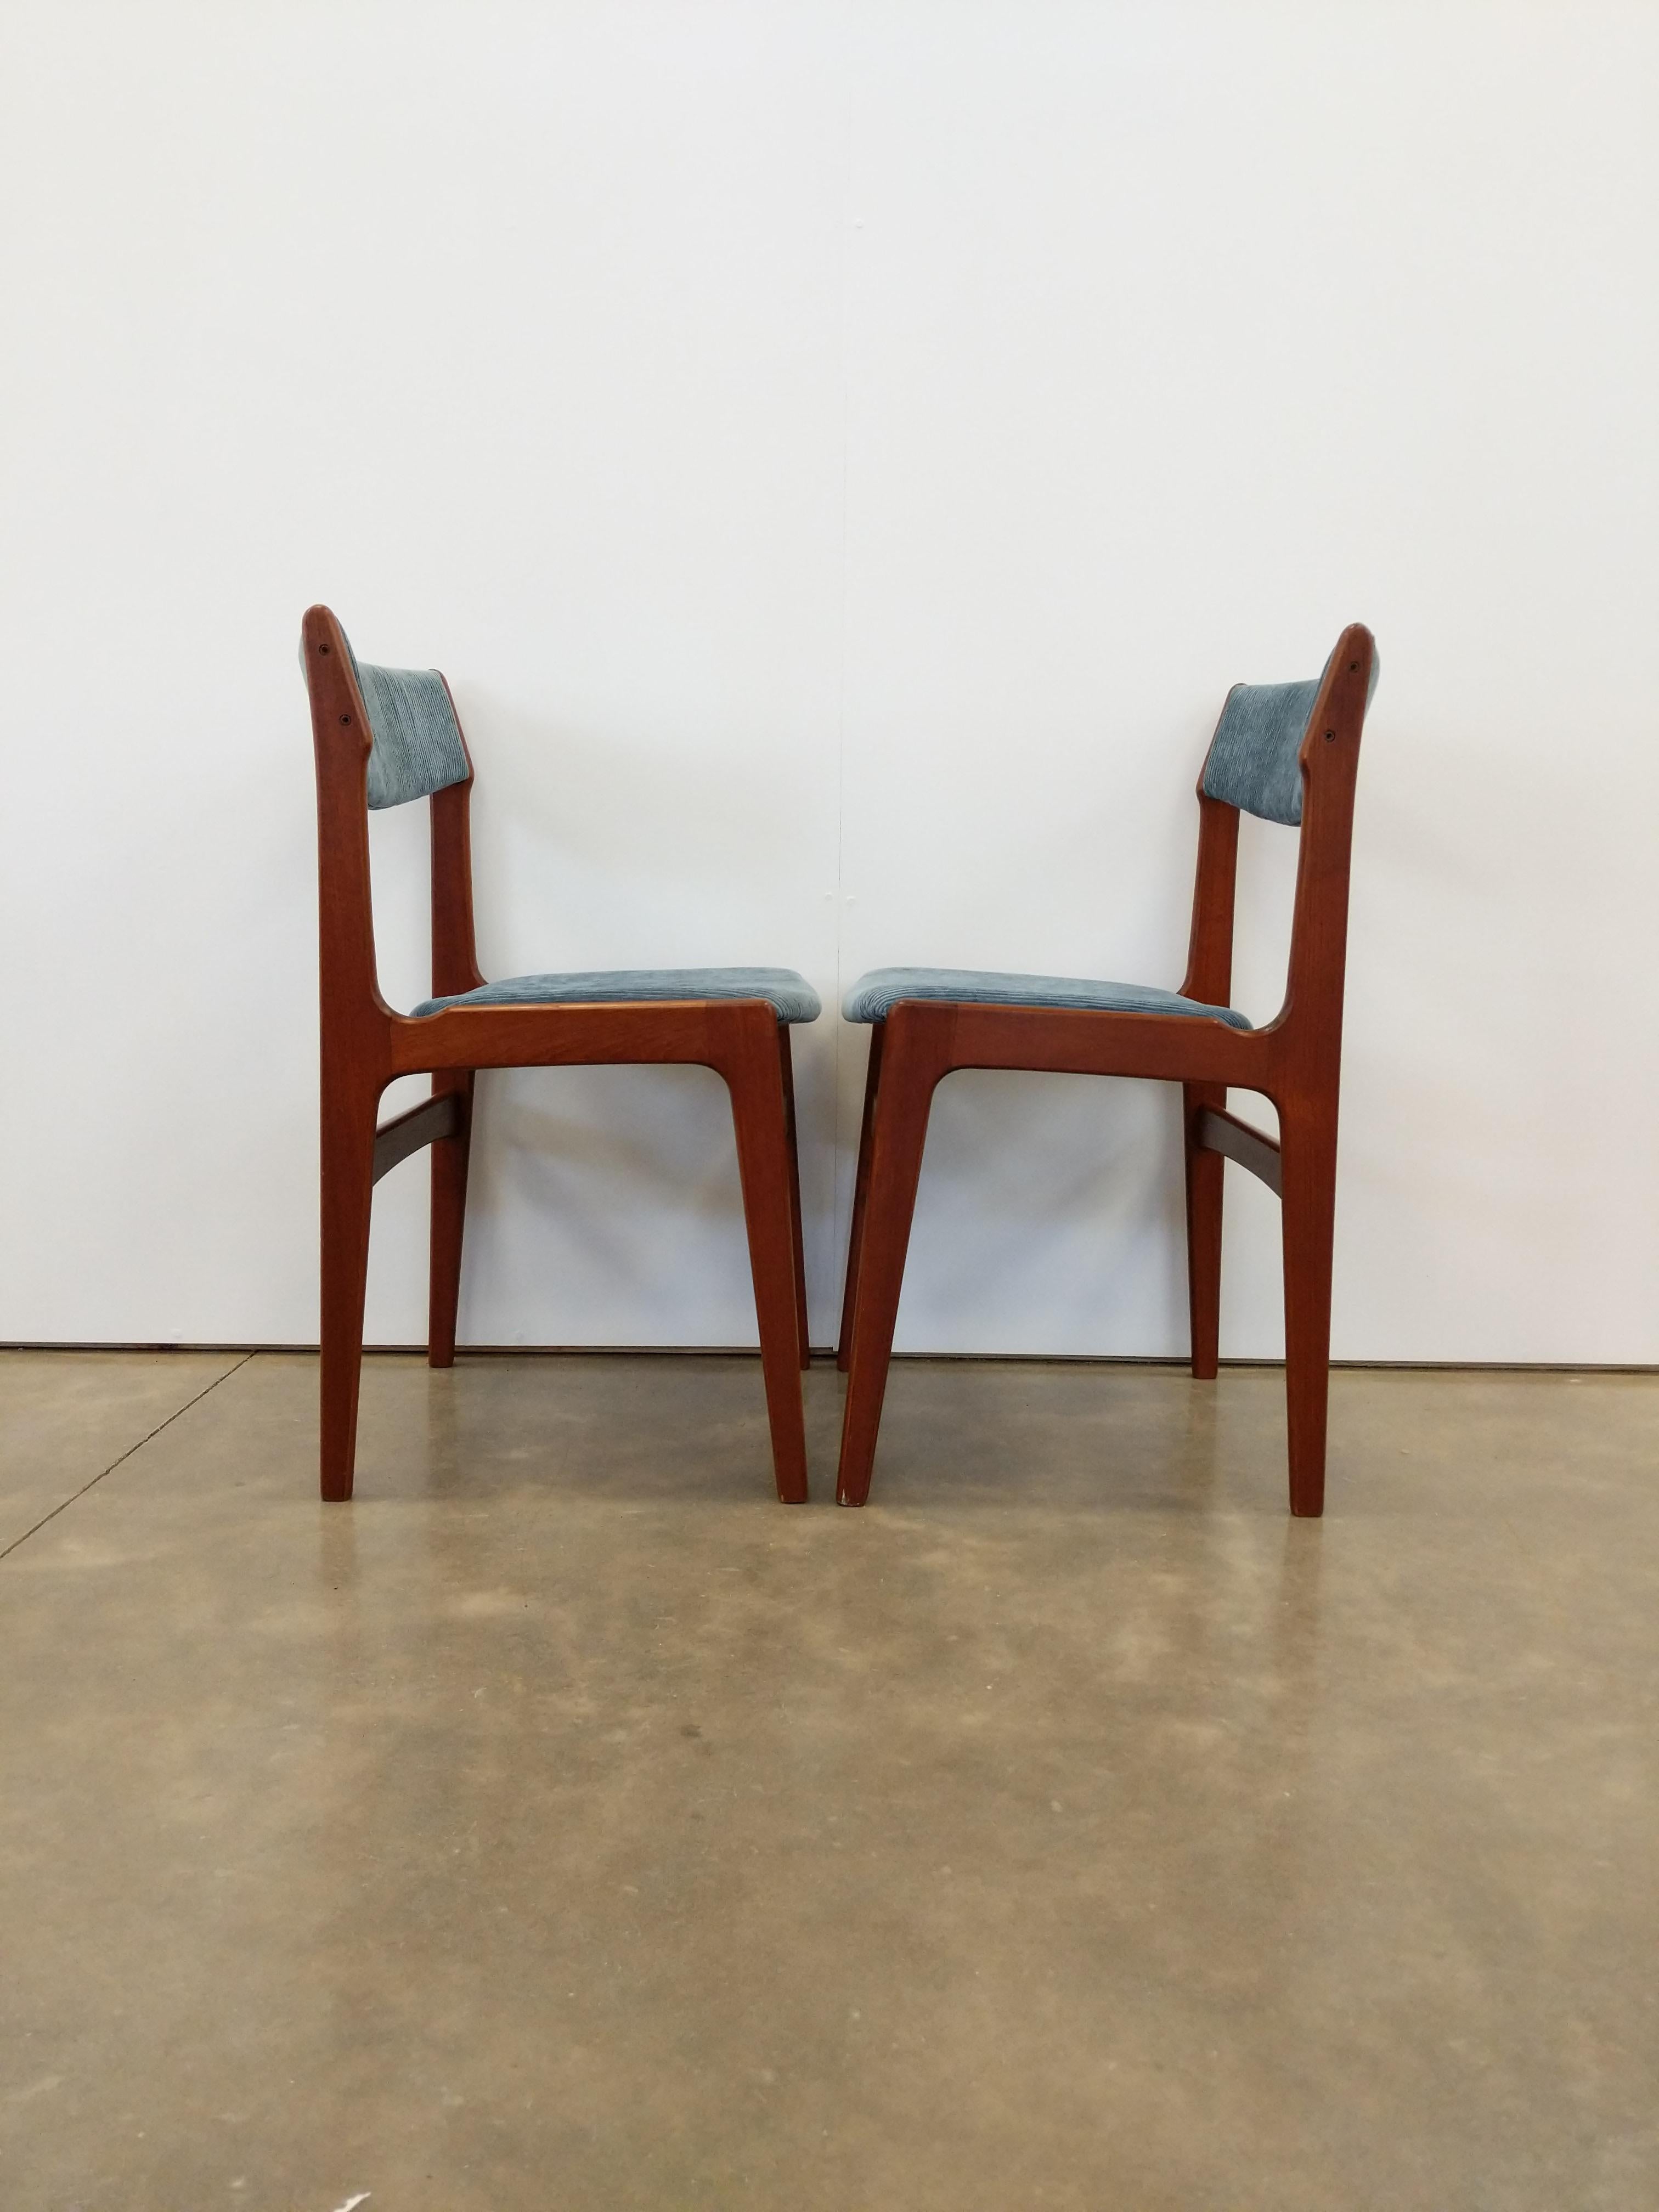 Pair of authentic vintage mid century Danish / Scandinavian Modern dining chair.

Designed by Erik Buch for Anderstrup Møbelfabrik.

This set is in excellent refurbished condition with brand new Knoll corduroy upholstery.

If you would like any